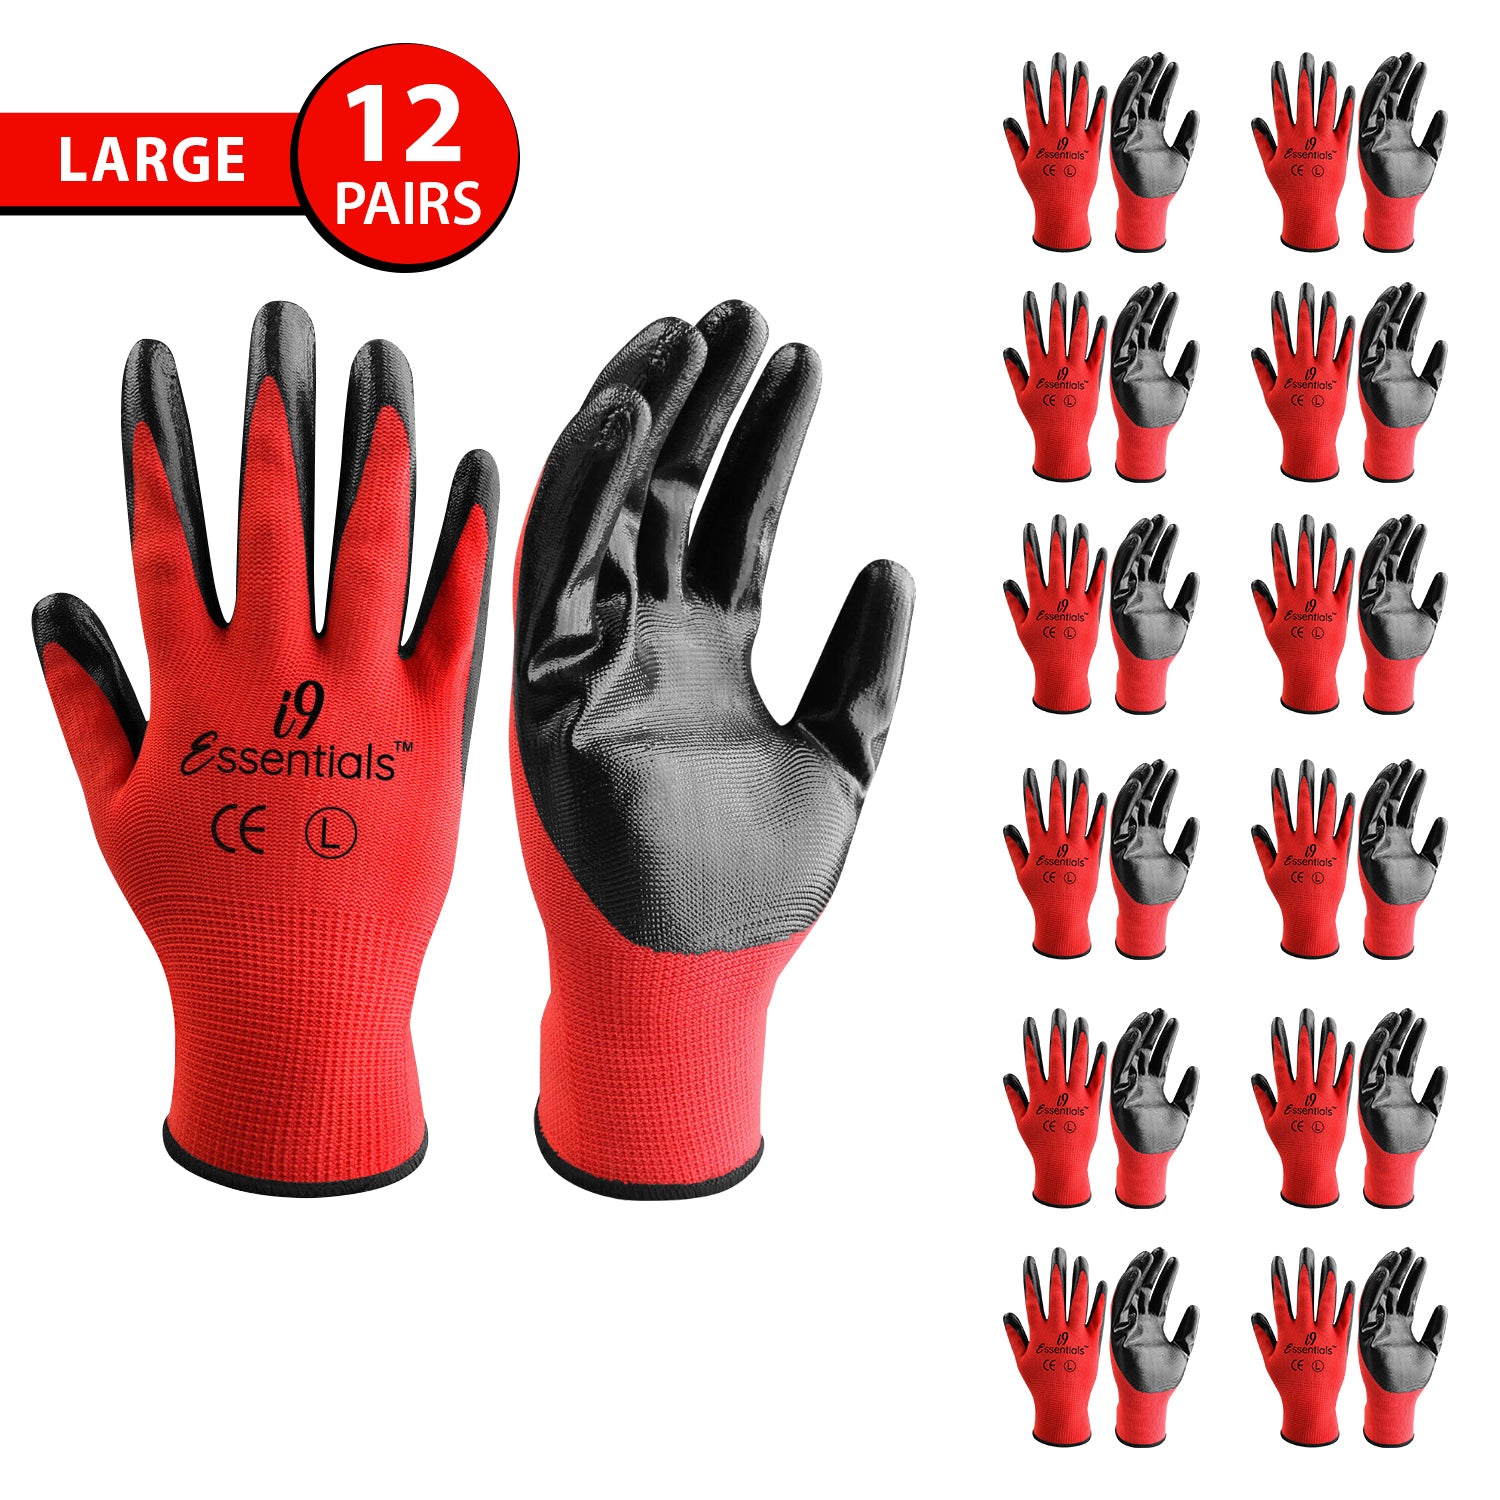 Large - 12 Pairs Red & Black Nitrile Coated Work Gloves for Men and Wo – i9  Essentials